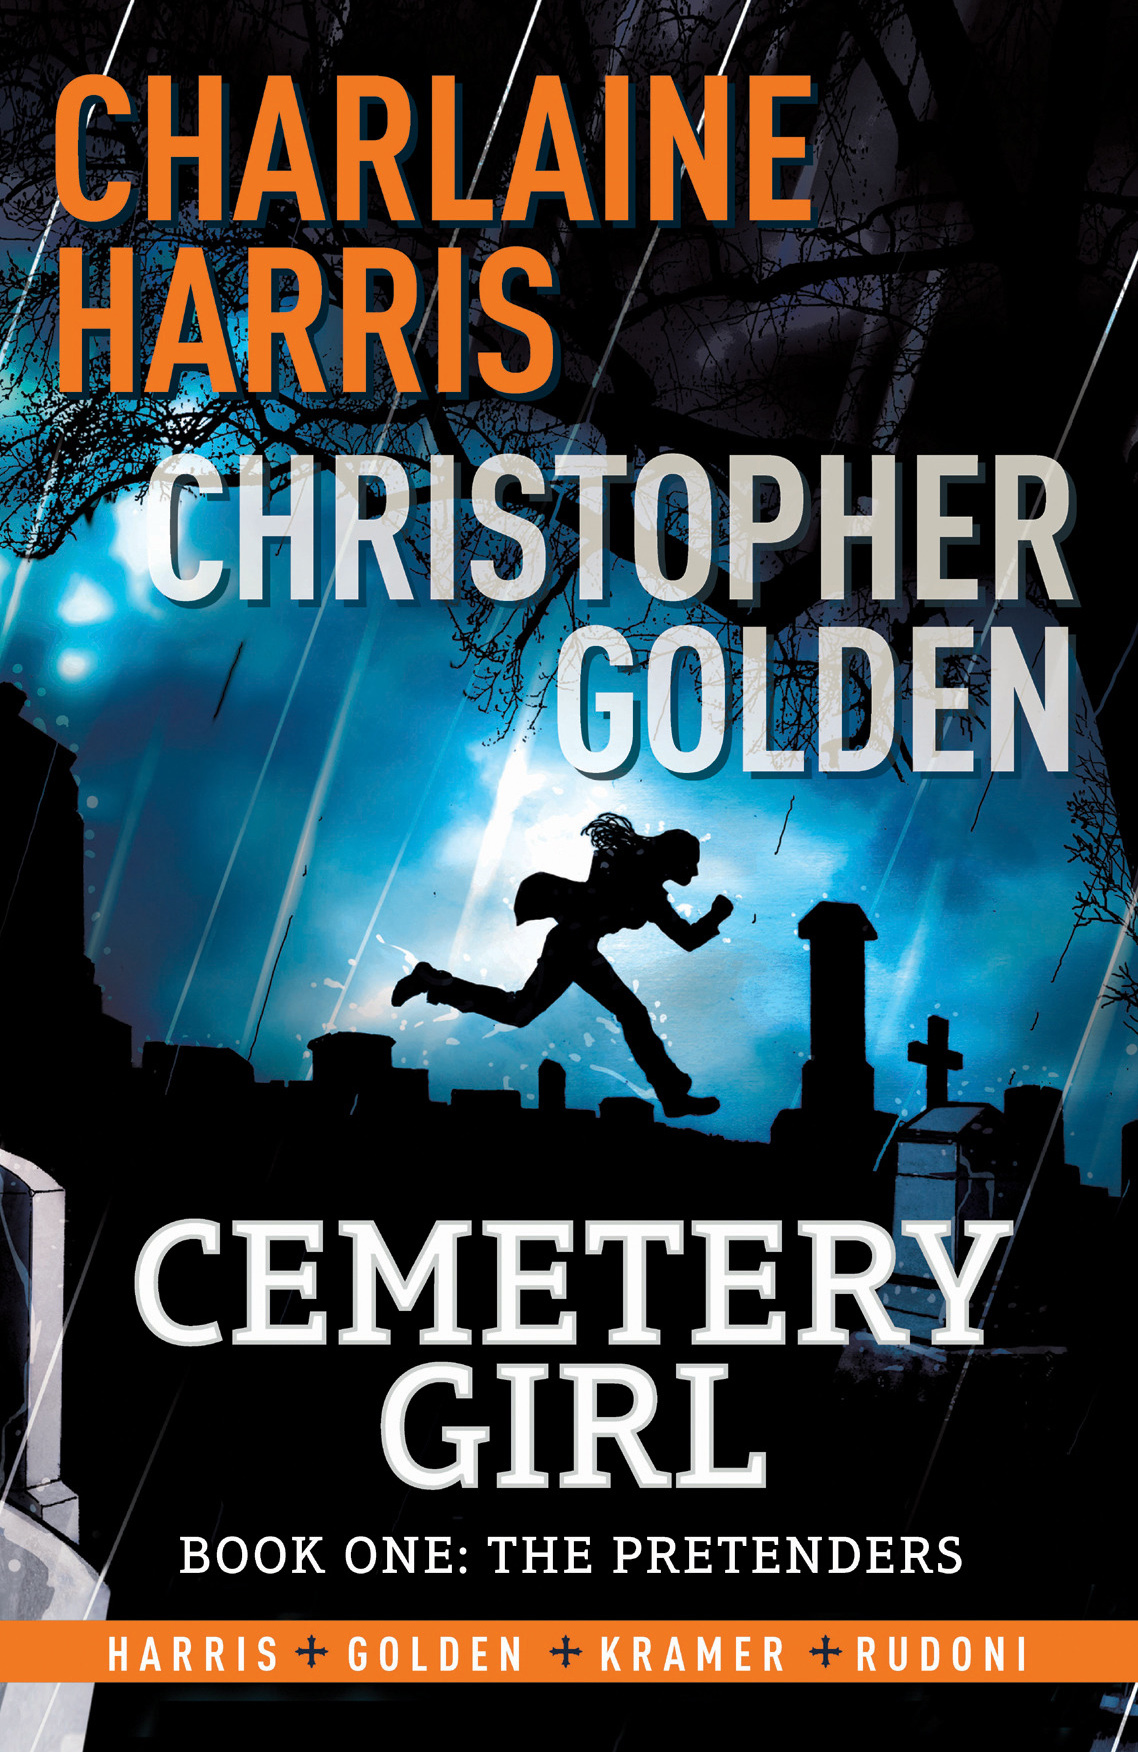 Read online Cemetery Girl comic -  Issue # TPB 1 - 1